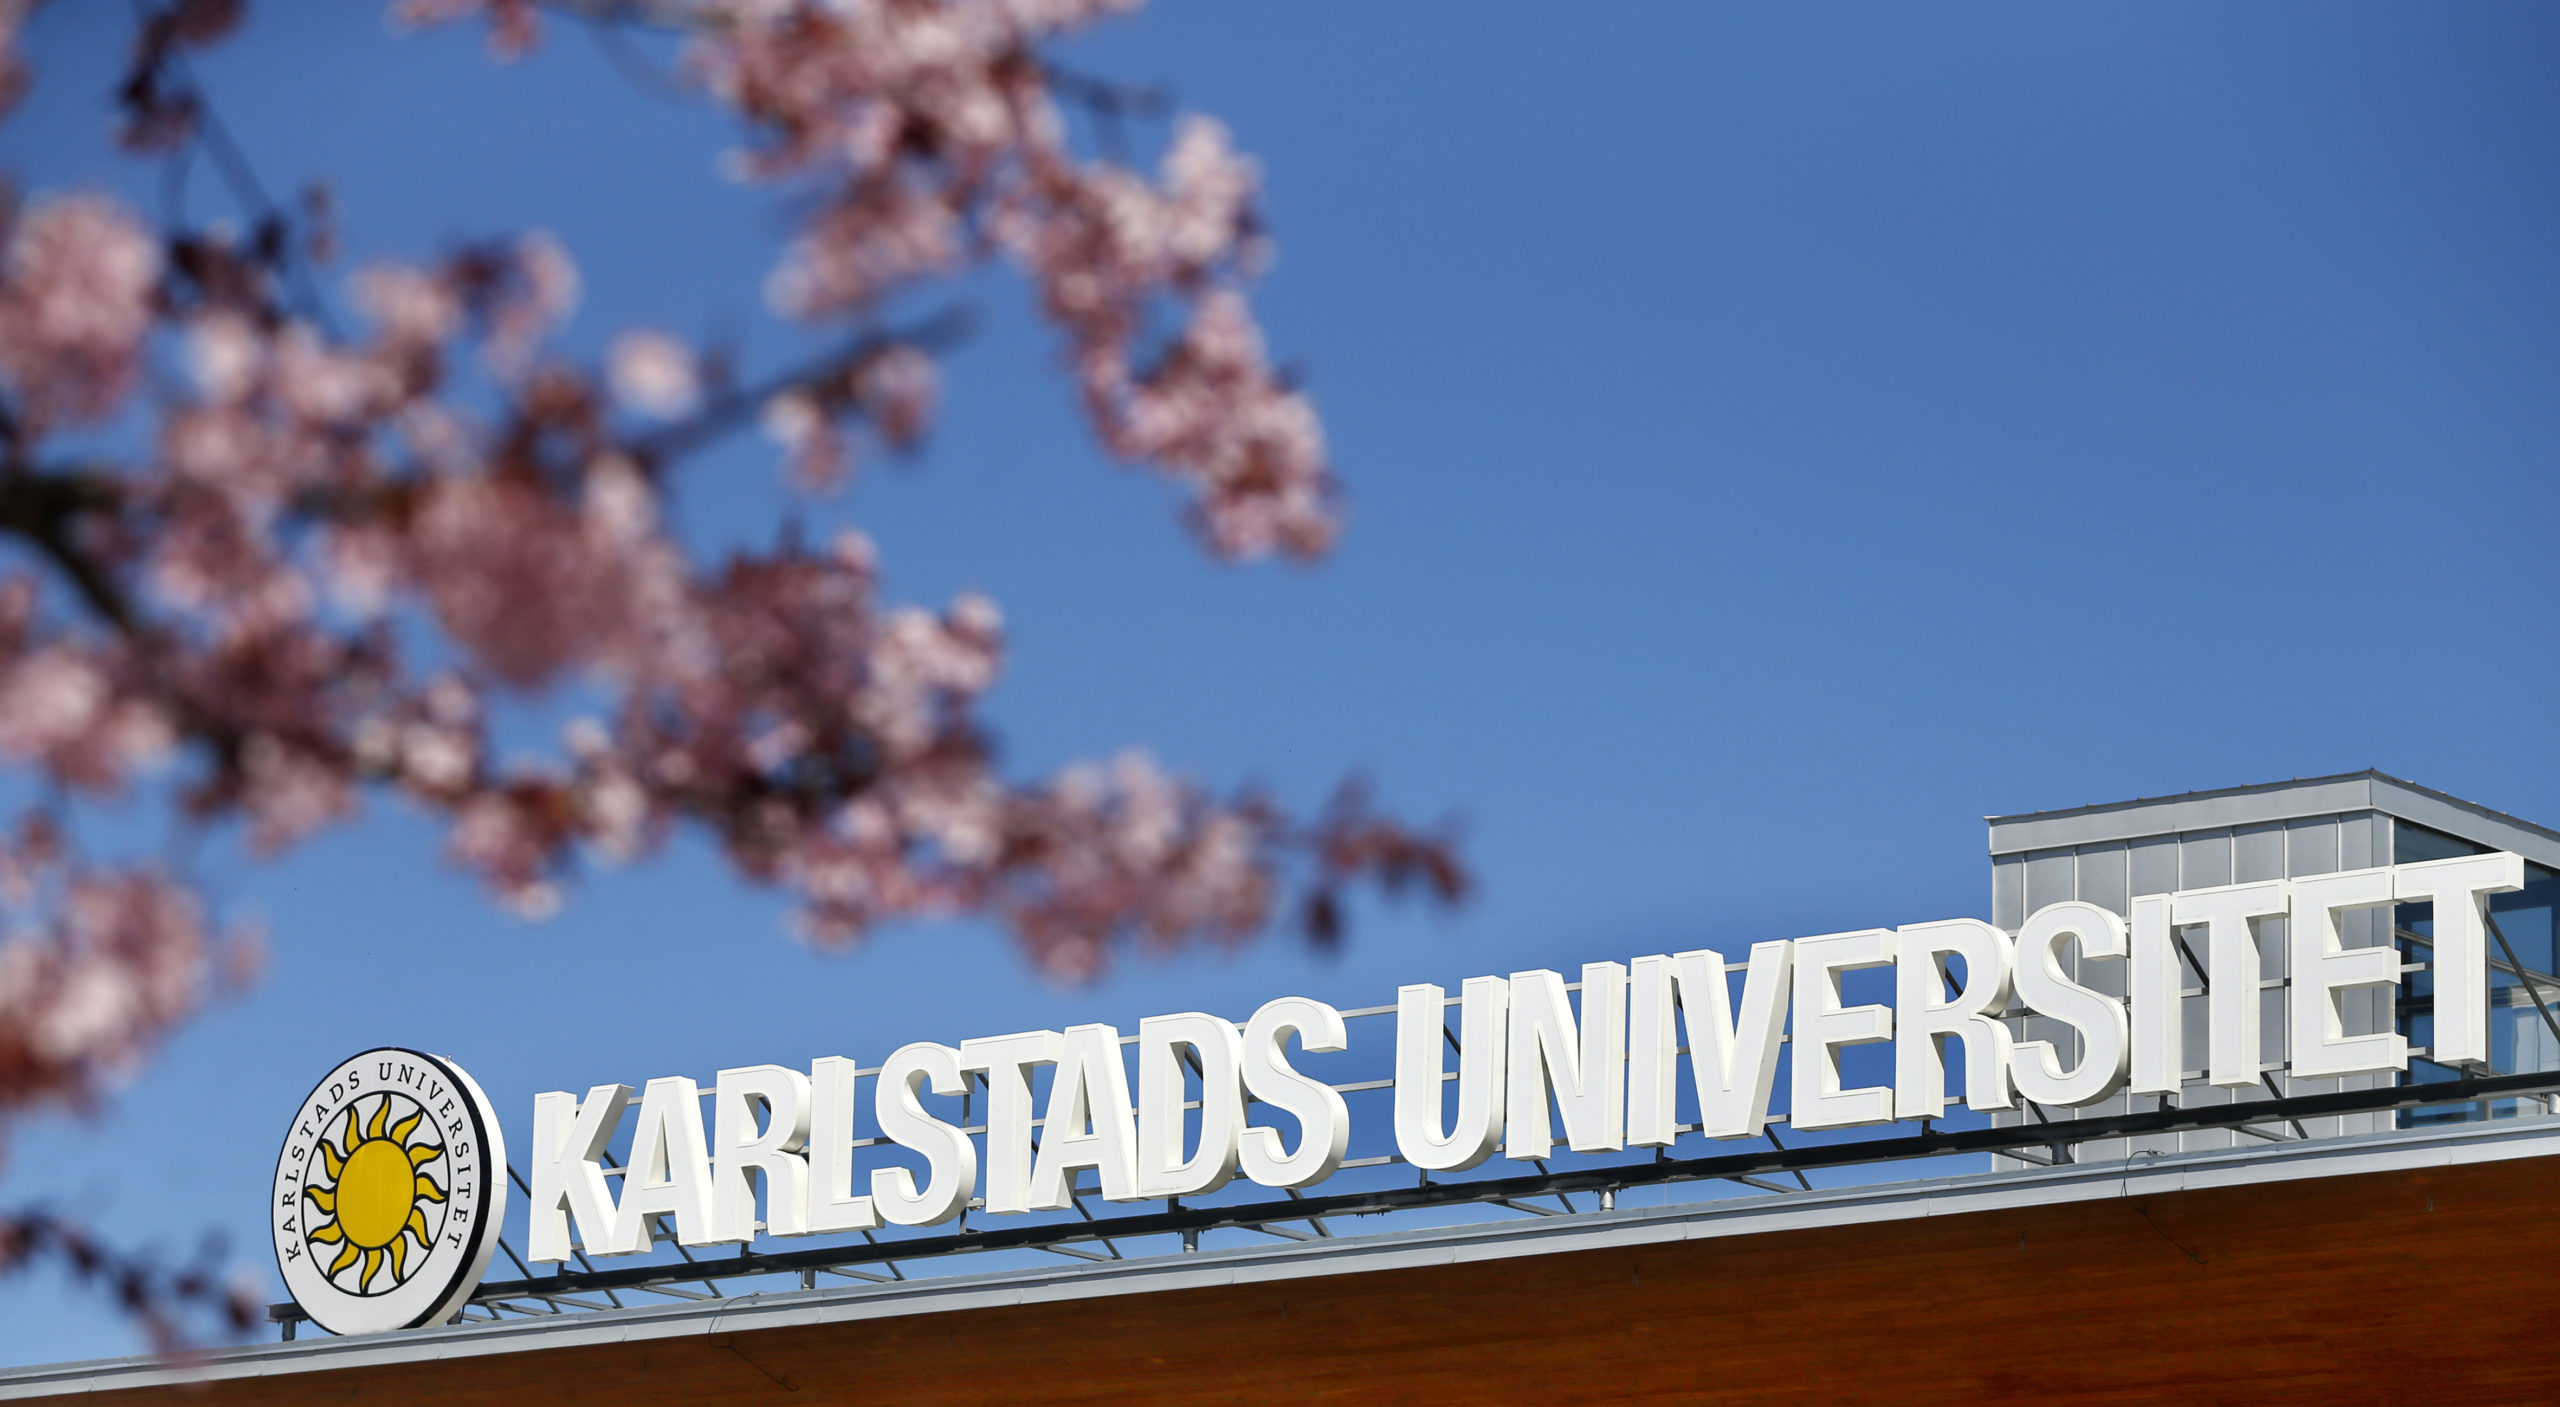 Karlstad University title at the building